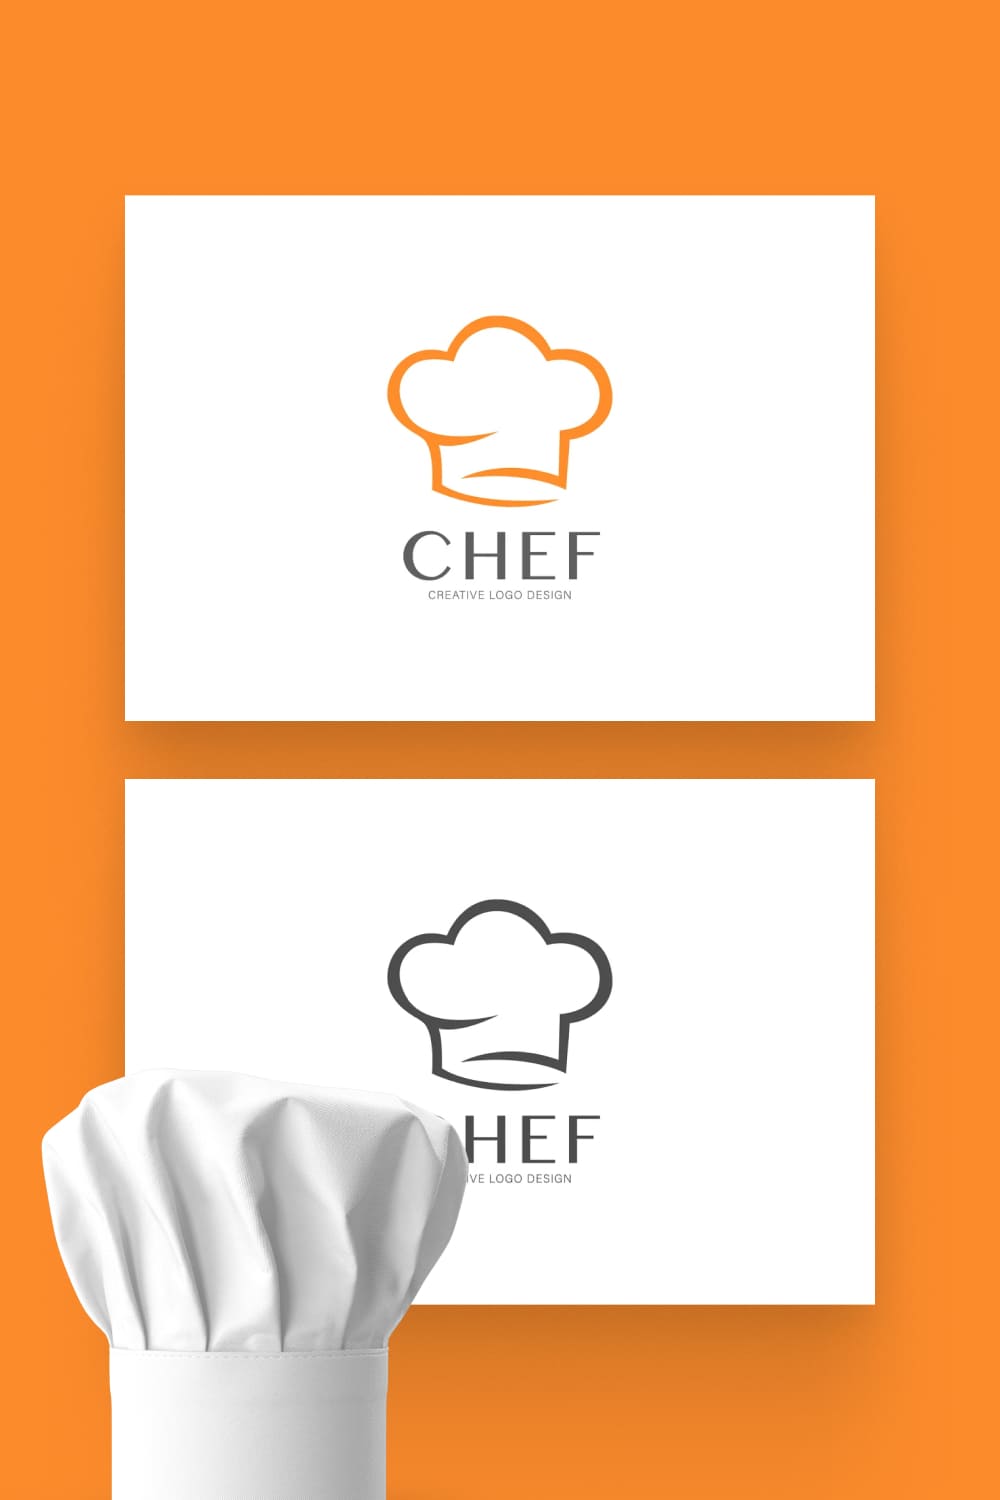 Two-colored logos for food industry.